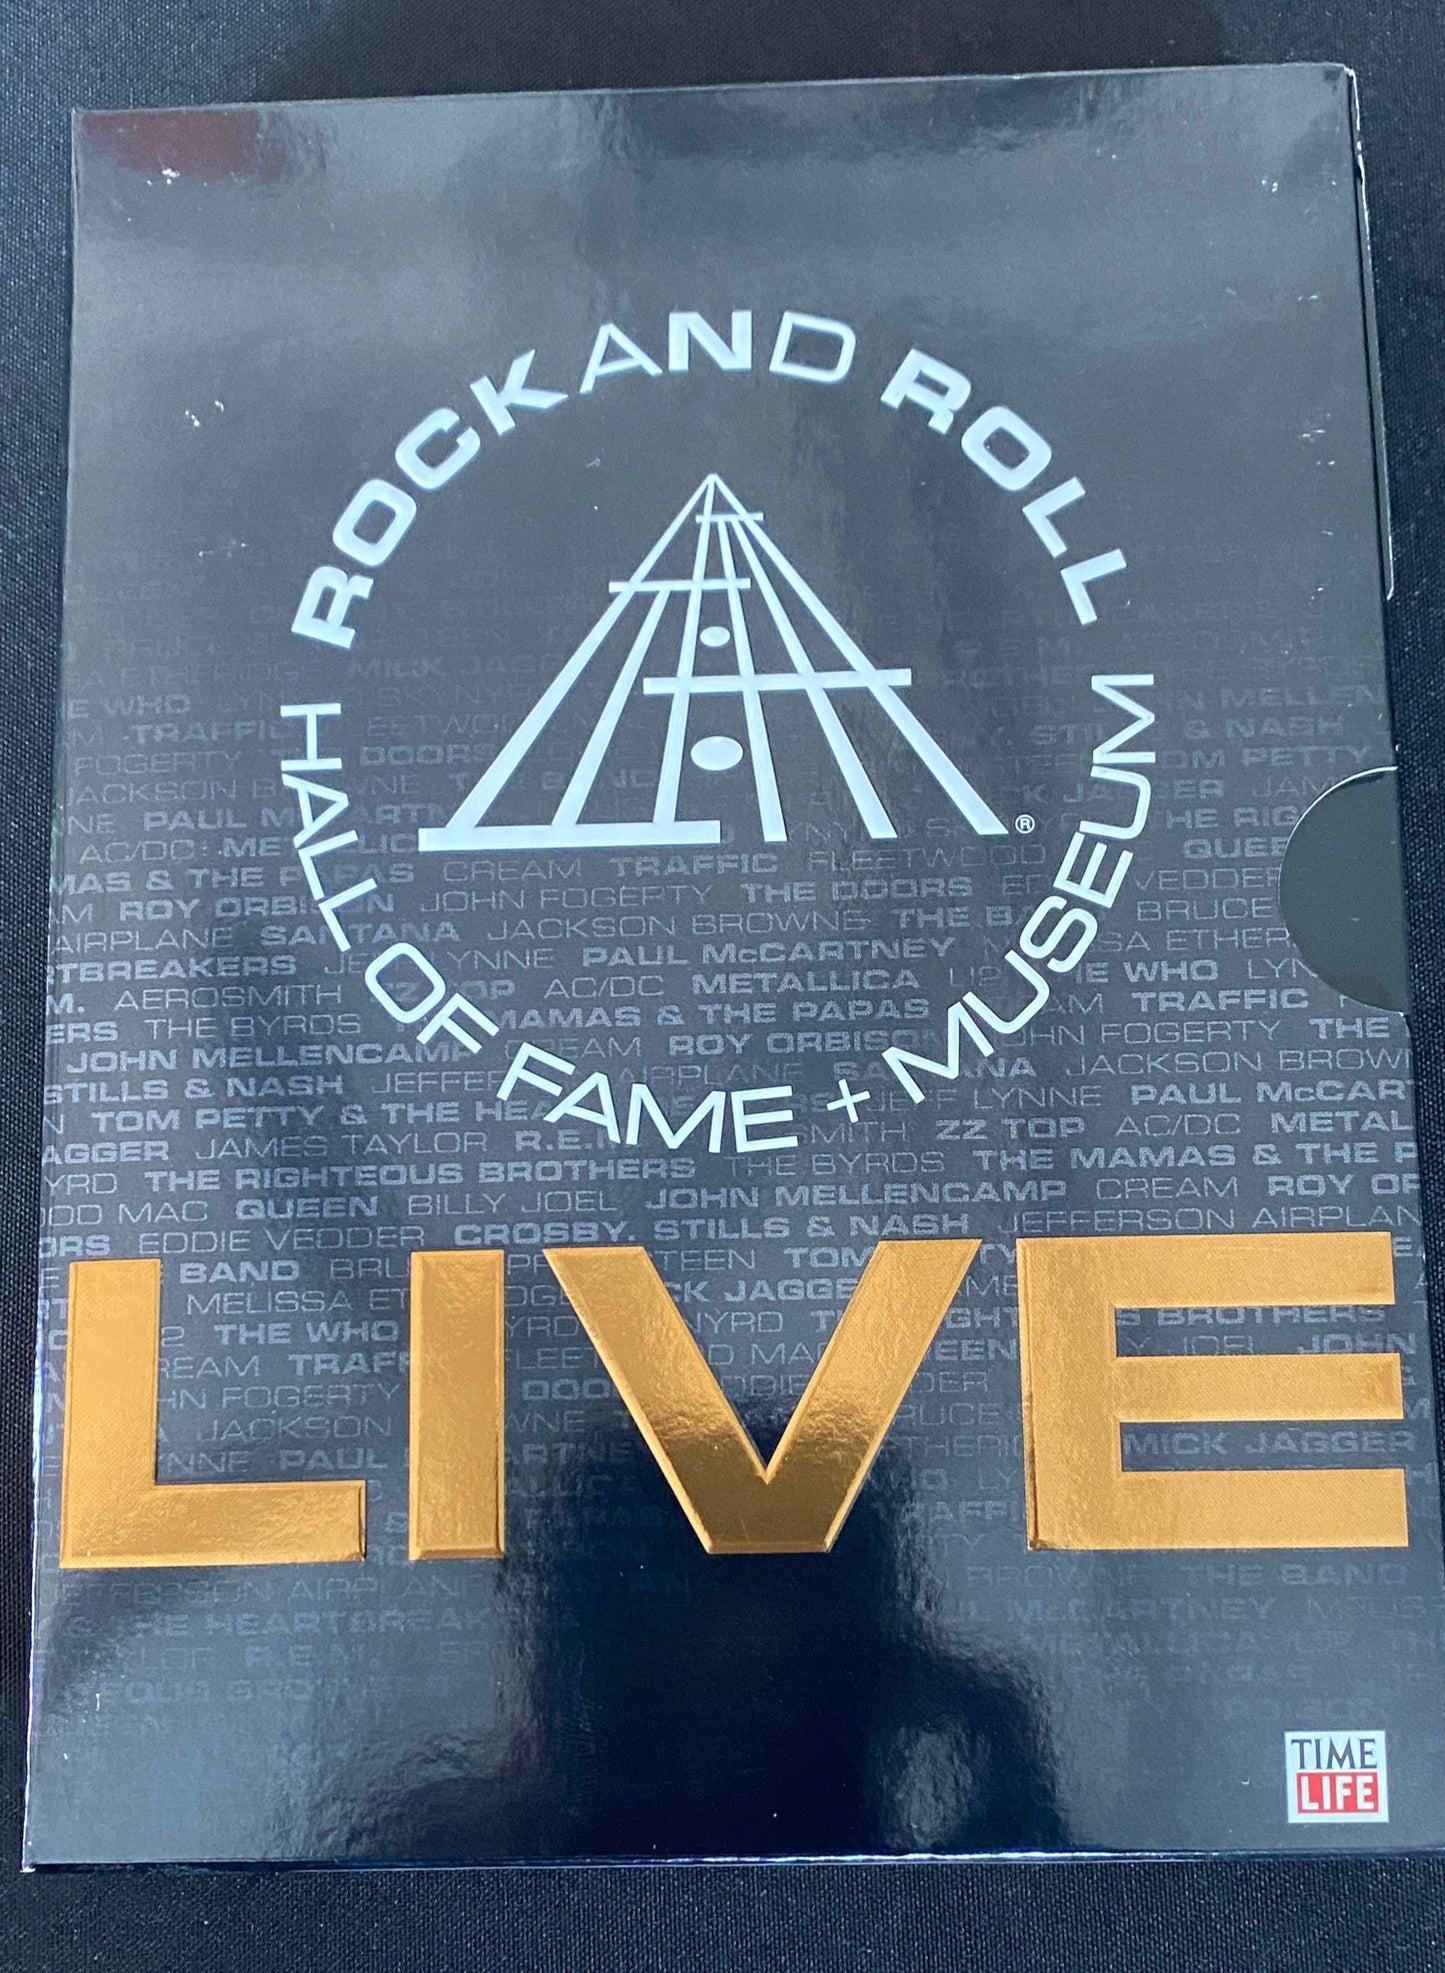 Rock & Roll Hall of Fame +Museum Live